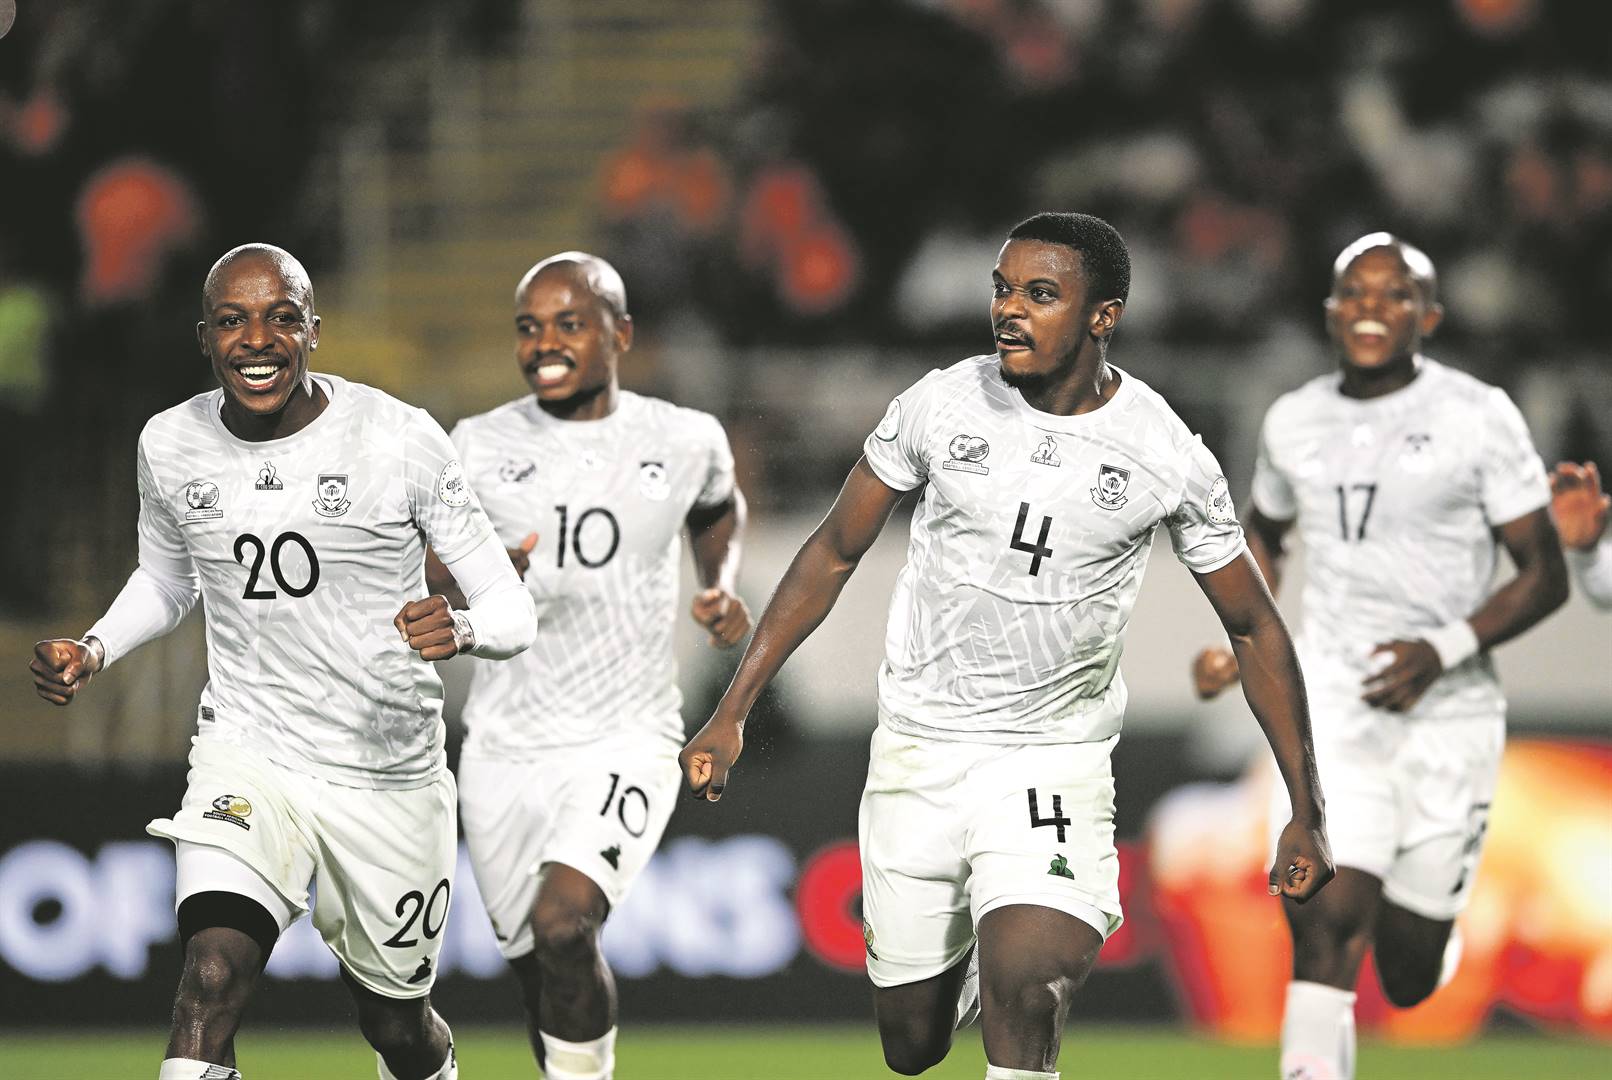 Teboho Mokoena of South Africa (jersey number 4) celebrates his goal with teammates during the 2023 TotalEnergies CAF Africa Cup of Nations Round of 16 match against Morocco at Laurent Pokou Stadium in San Pedro, Cote d’Ivoire on Tuesday, 30 January. Photo by Ryan Wilkisky/BackpagePix